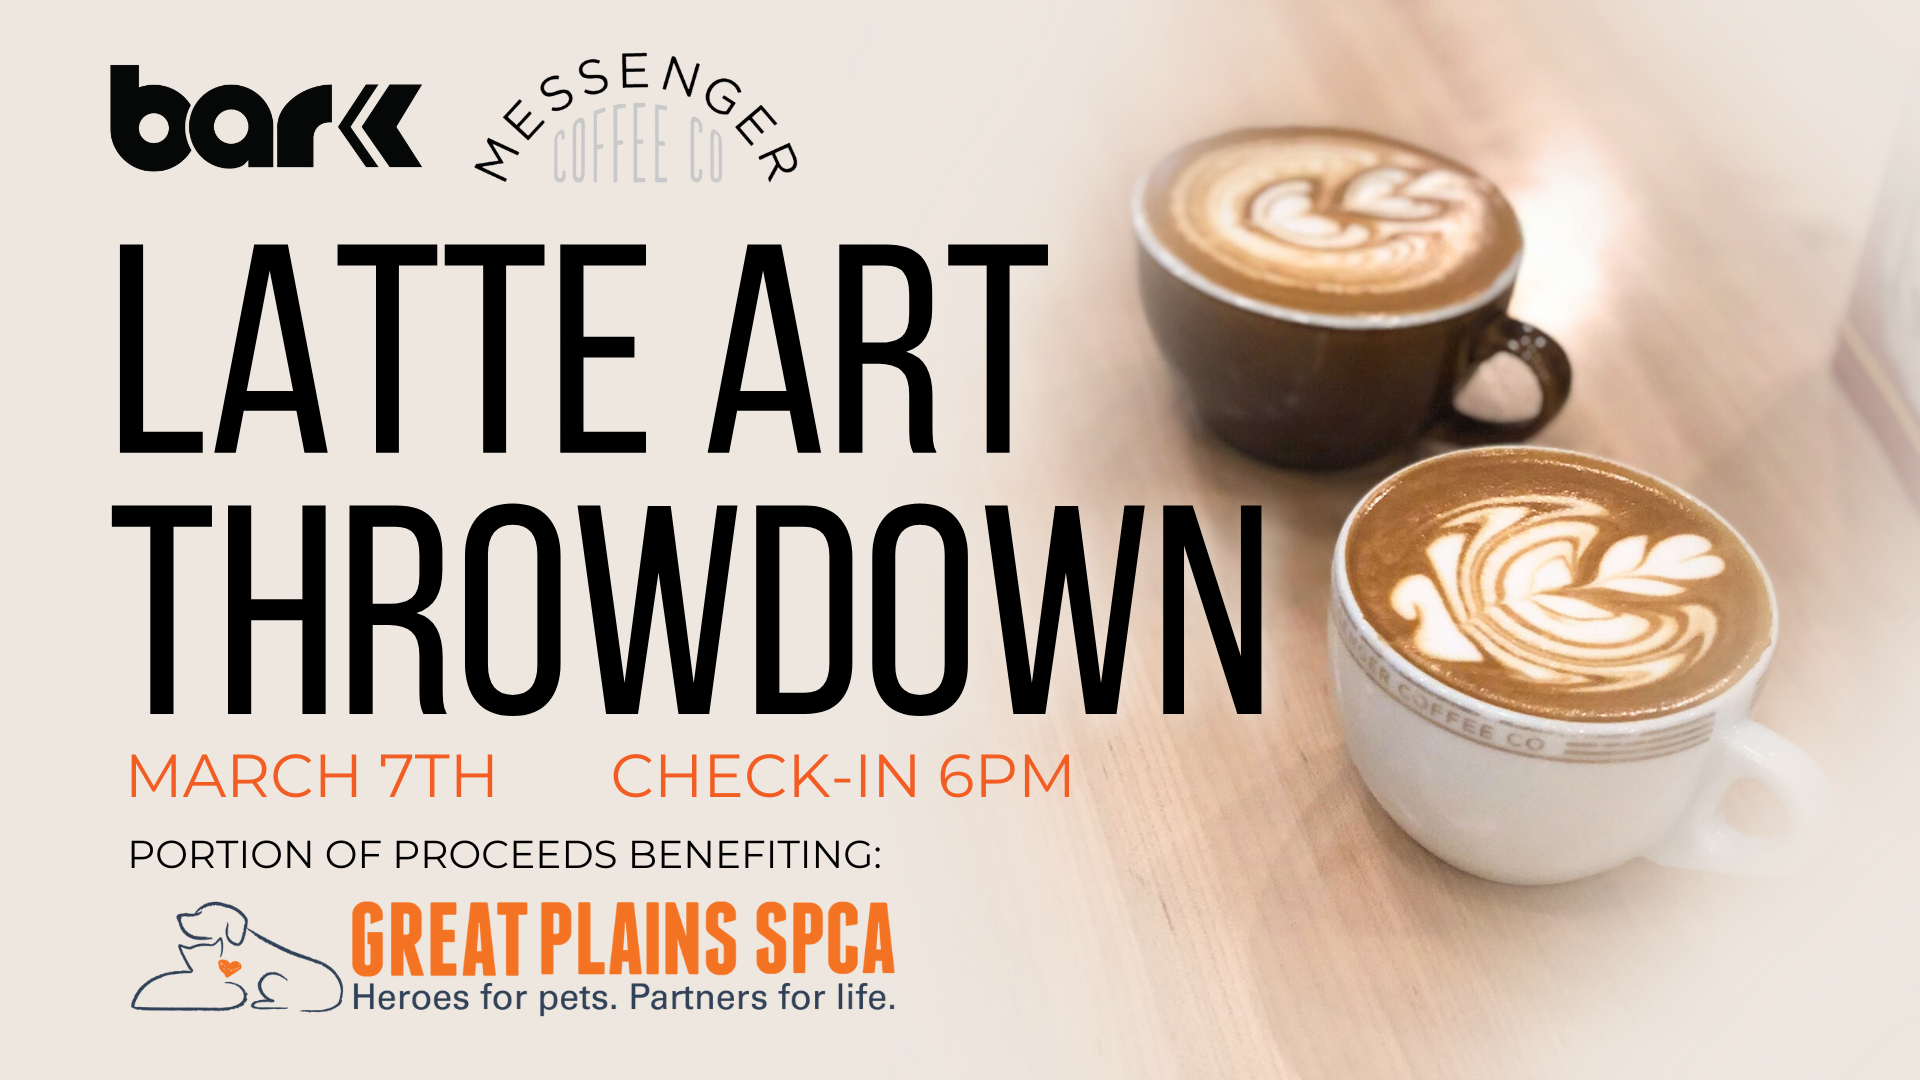 Bar K Messenger coffee co presenting Latte Art Throwdown. March 7th with check-in at 6pm. Portion of proceeds go to Great Plains SPCA.